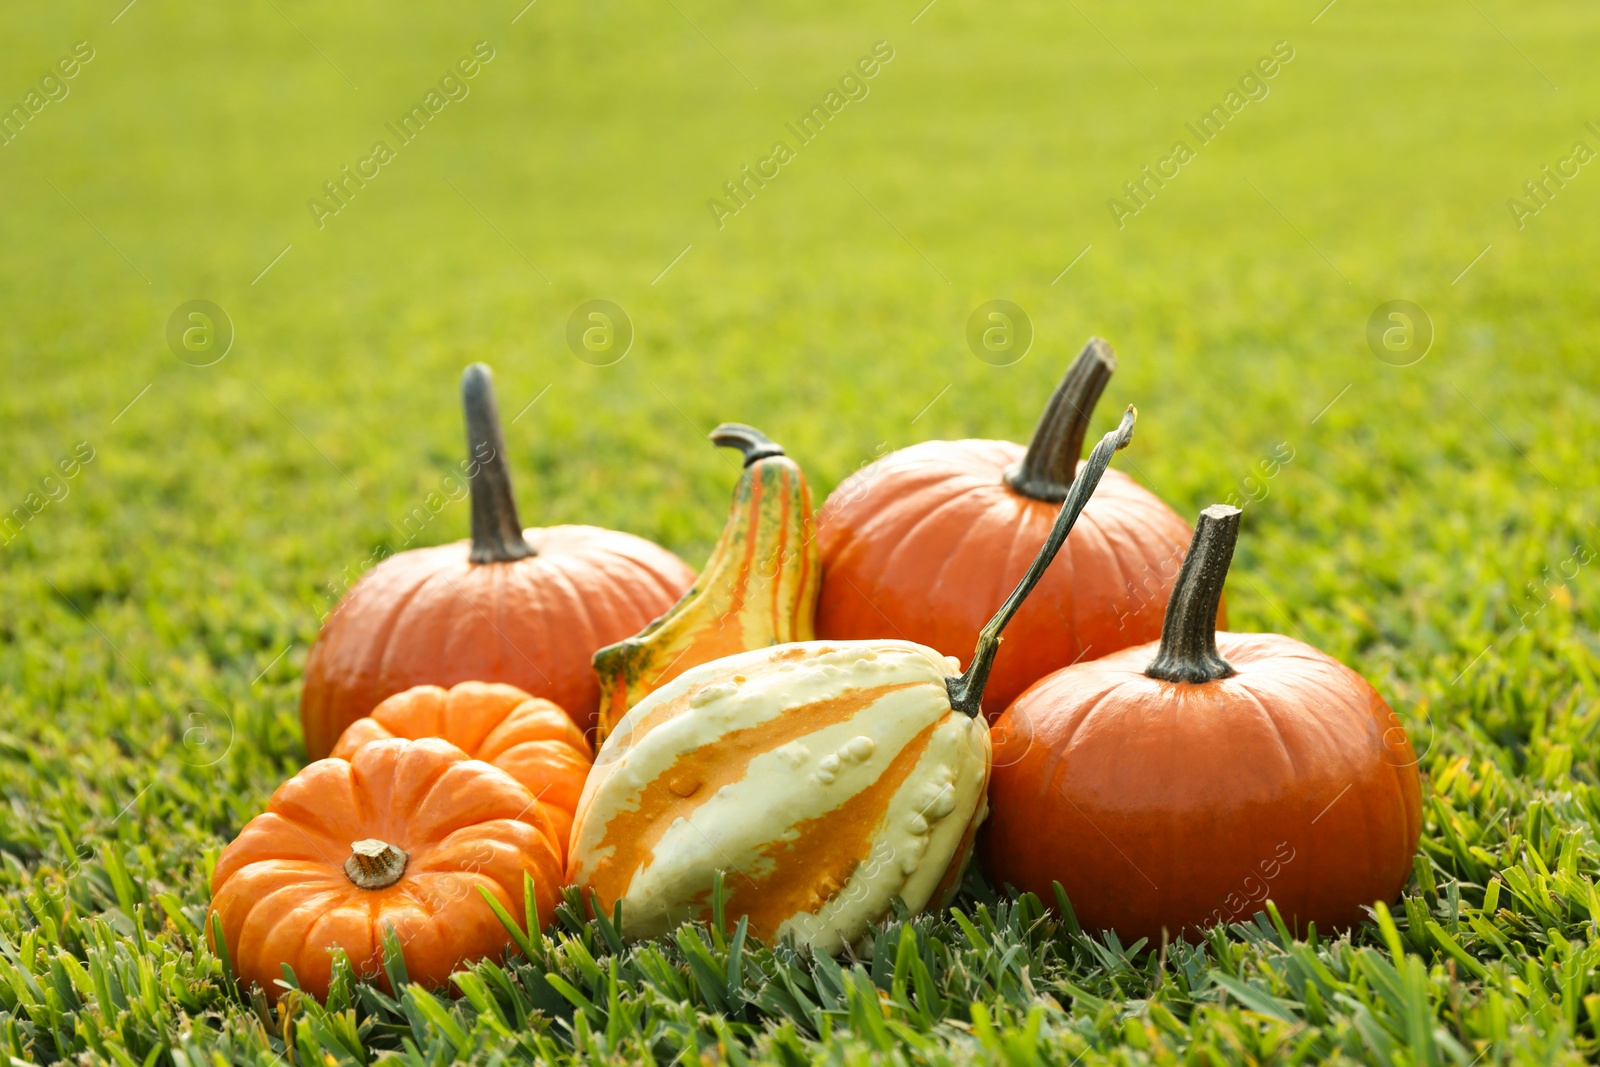 Photo of Many orange pumpkins on green grass outdoors